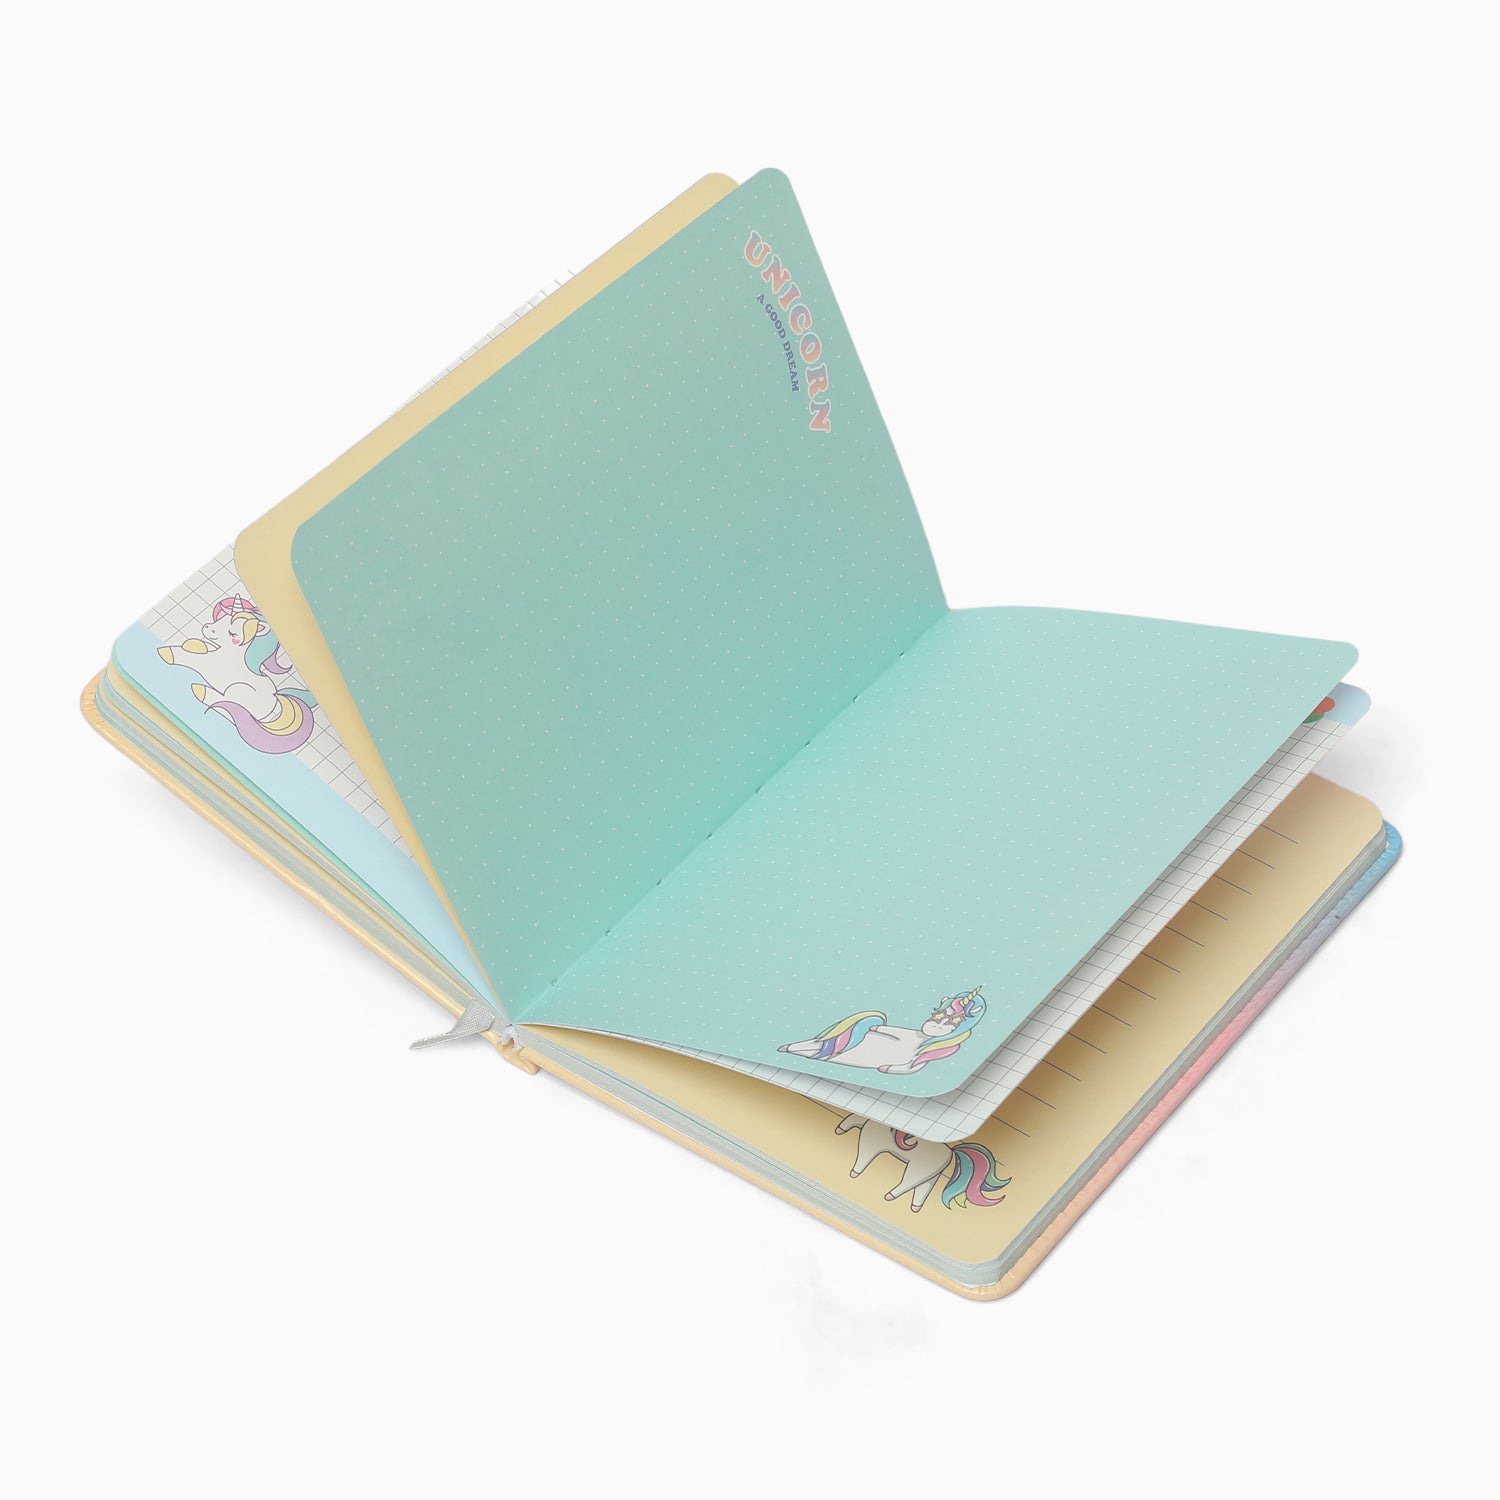 Cute 3D Squishy Unicorn Themed Fancy Notebook with printed pages for your tots